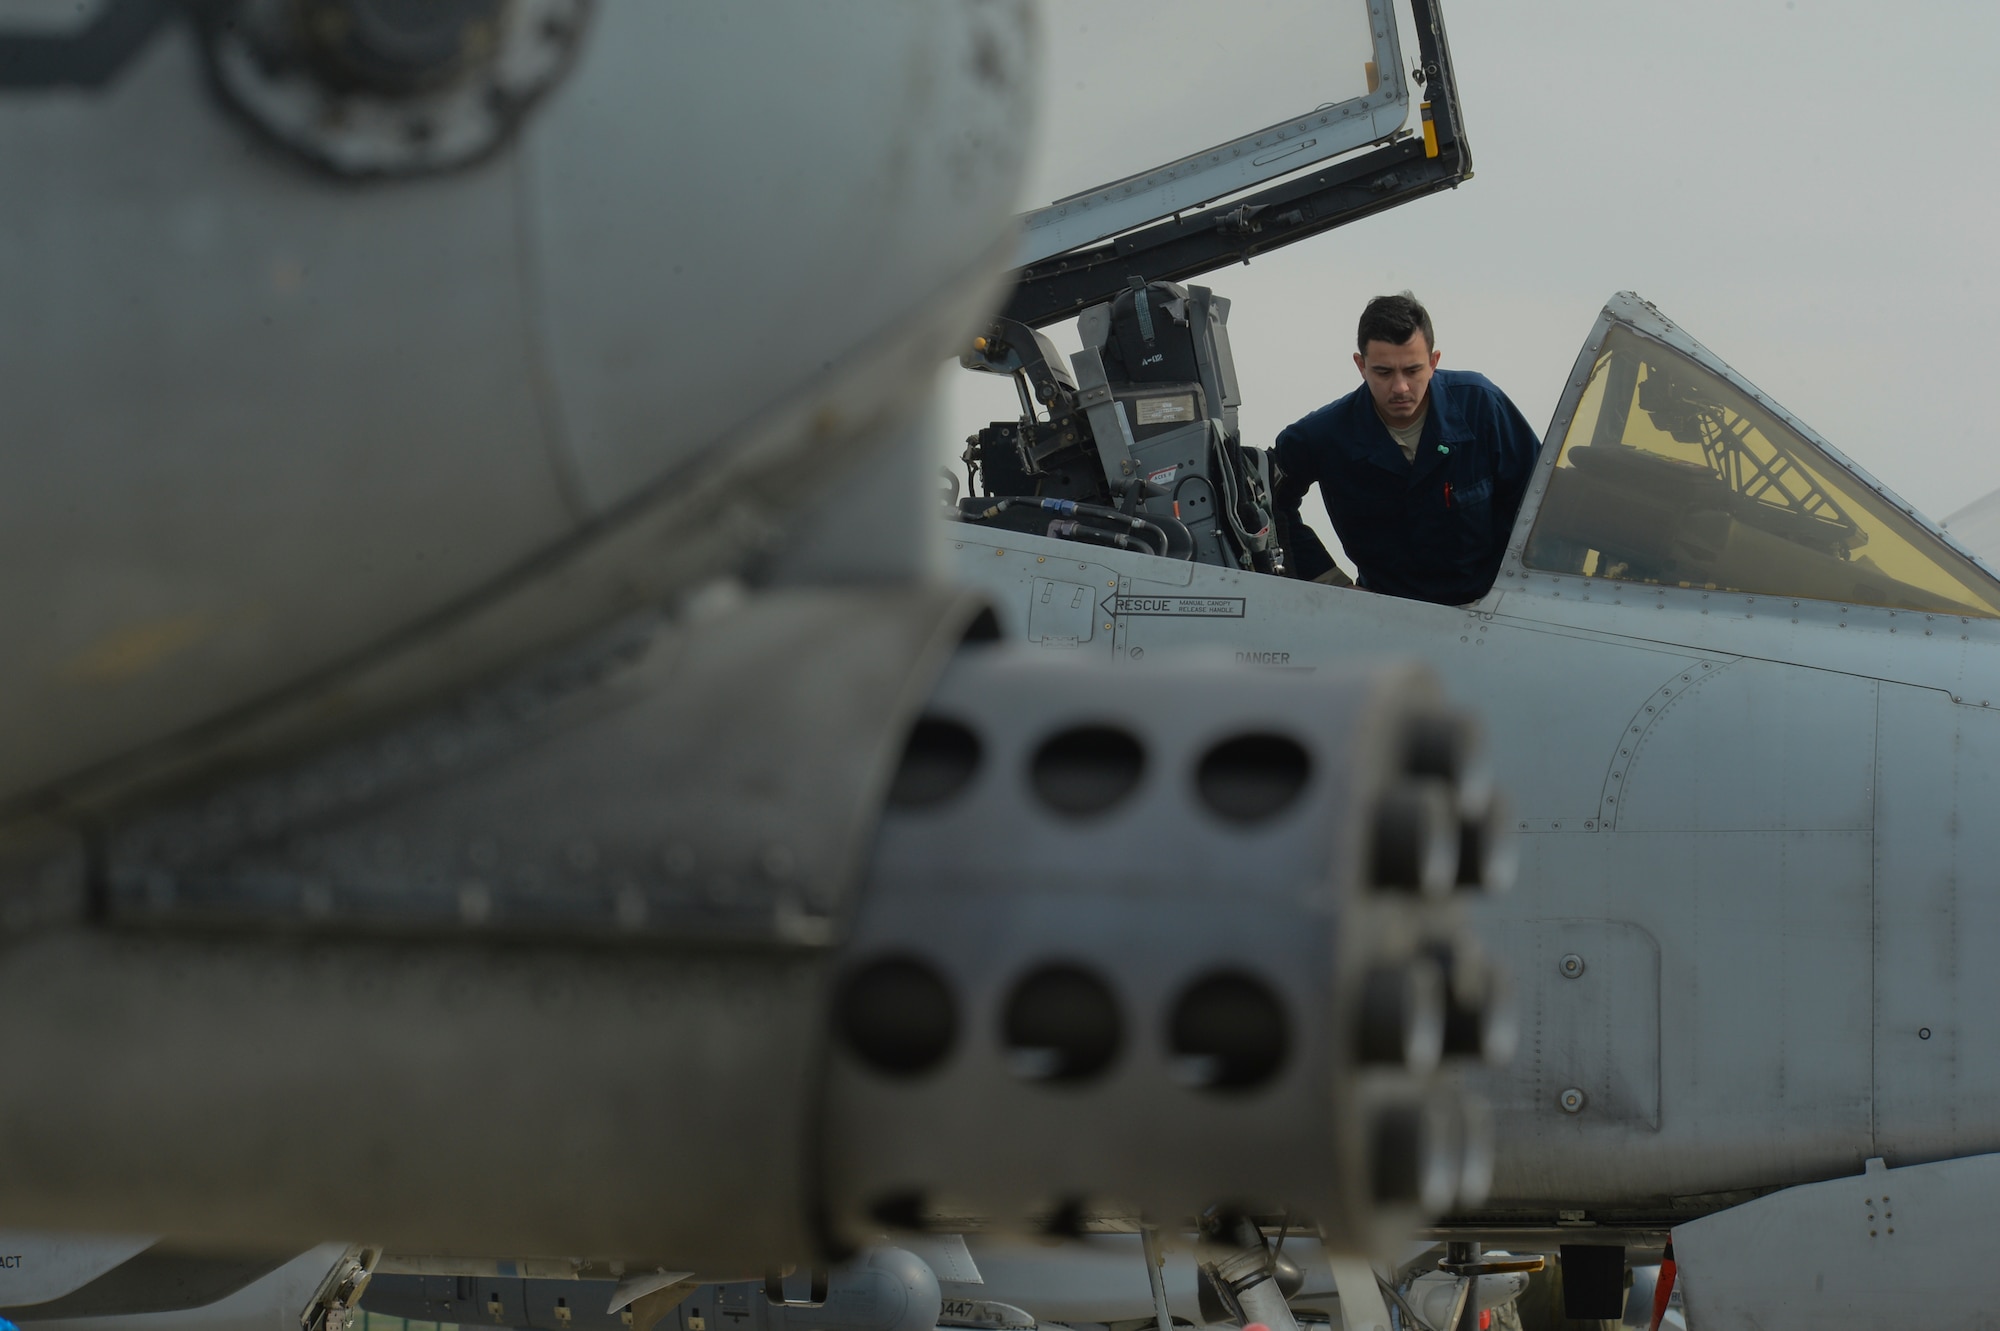 A U.S. Air Force crew chief assigned to the 354th Expeditionary Fighter Squadron inspects the cockpit of an A-10 Thunderbolt II during a theater security package deployment at Campia Turzii, Romania, April 14, 2015. The aircraft will forward deploy to locations in Eastern European NATO countries as part of the TSP. (U.S. Air Force photo by Staff Sgt. Joe W. McFadden/Released)